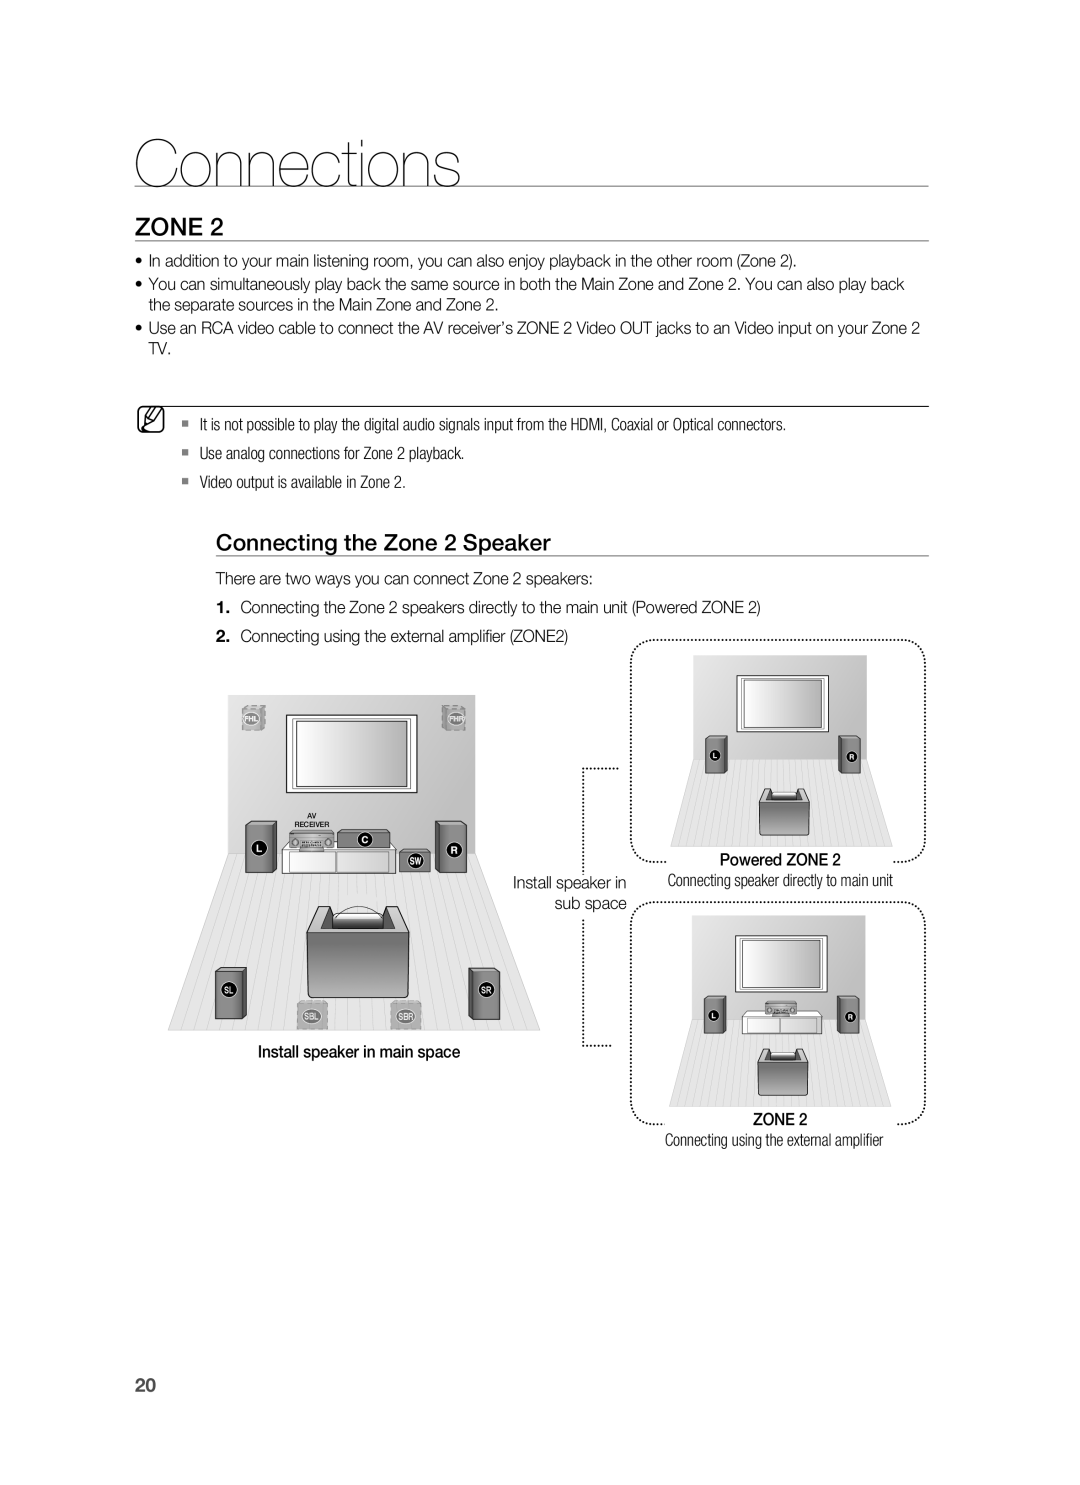 Samsung HW-C900-XAA user manual Connections, Connecting the Zone 2 Speaker 